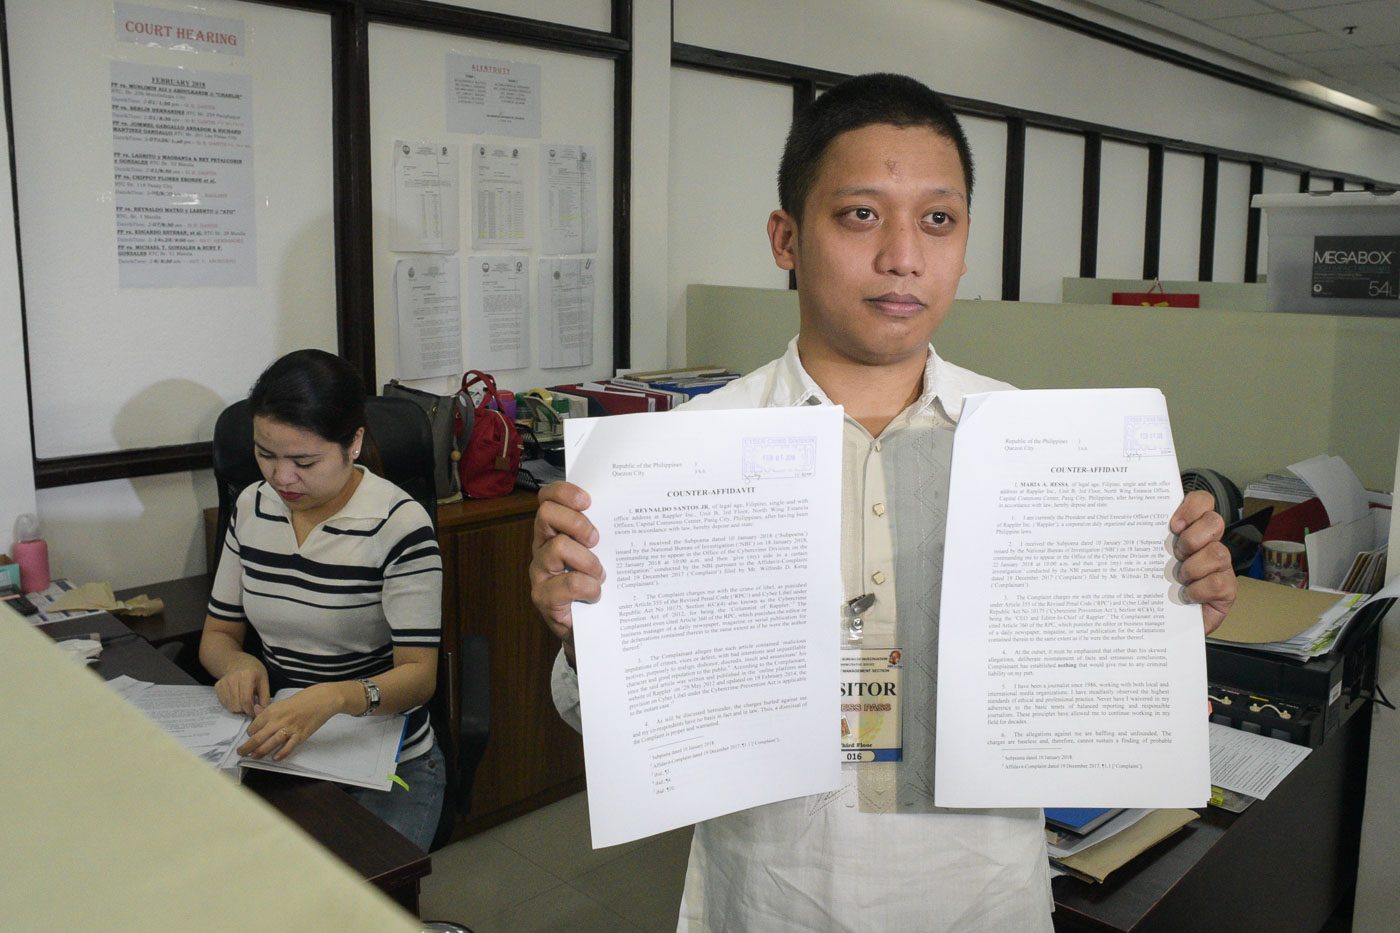 CYBER LIBEL. Rappler's counsel files a counter-affidavit for the cyber libel complaint against Rappler's Maria Ressa and Reynaldo Santos at the NBI cybercrime office on February 1, 2018. Photo by LeAnne Jazul/Rappler  